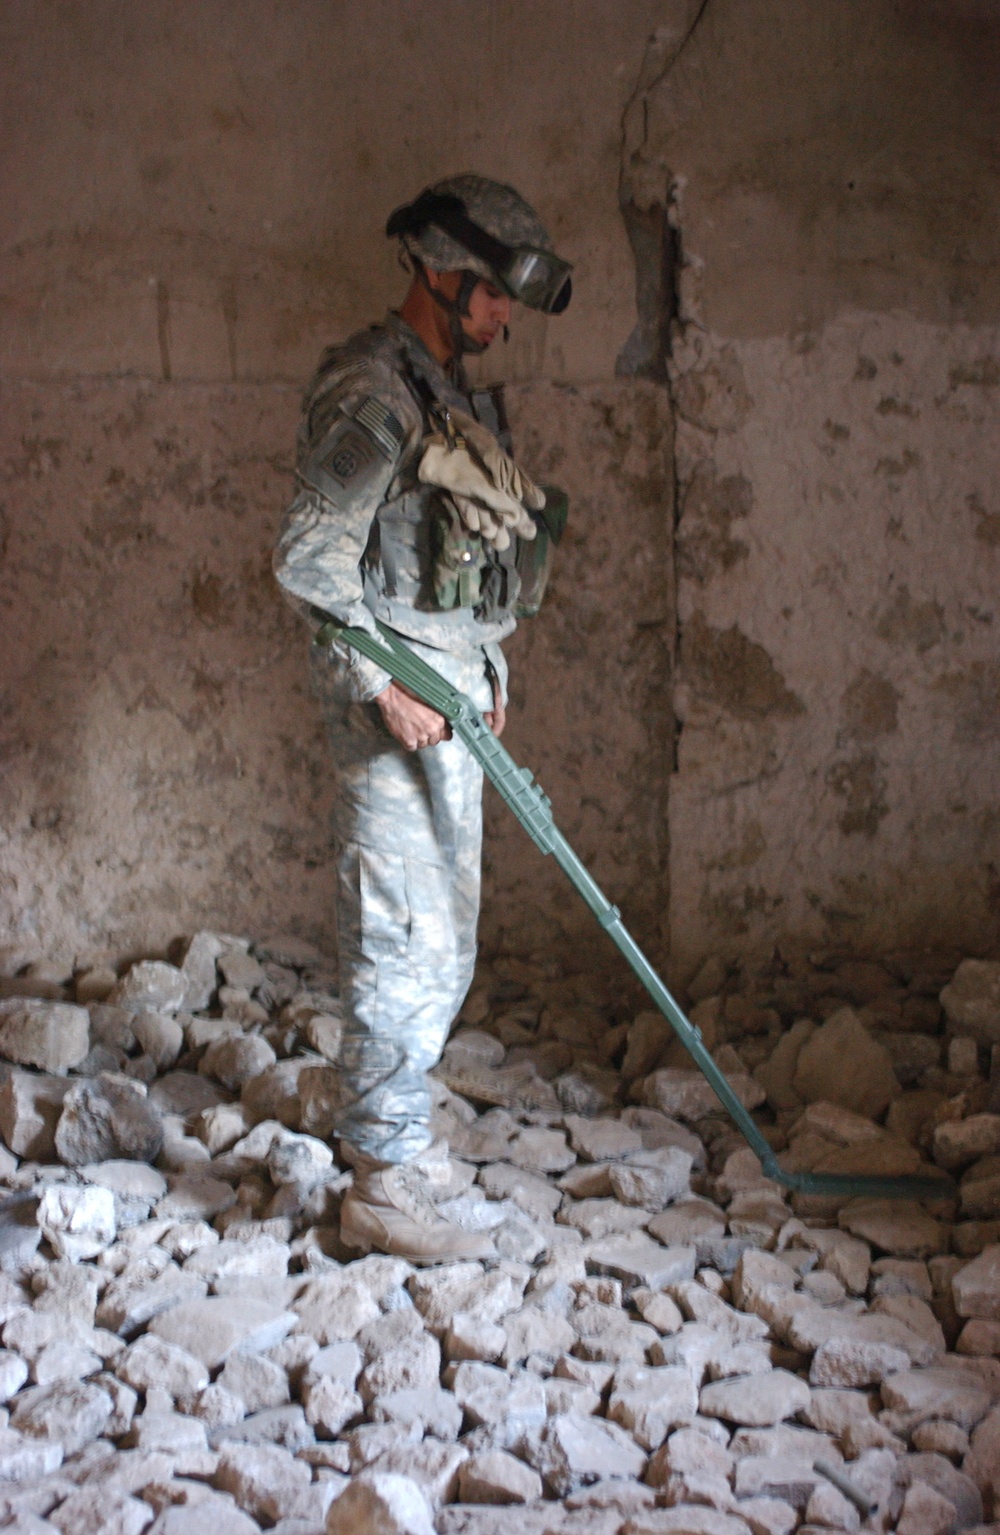 Pfc. Cuellar searches the floor of a house for hidden weapon caches